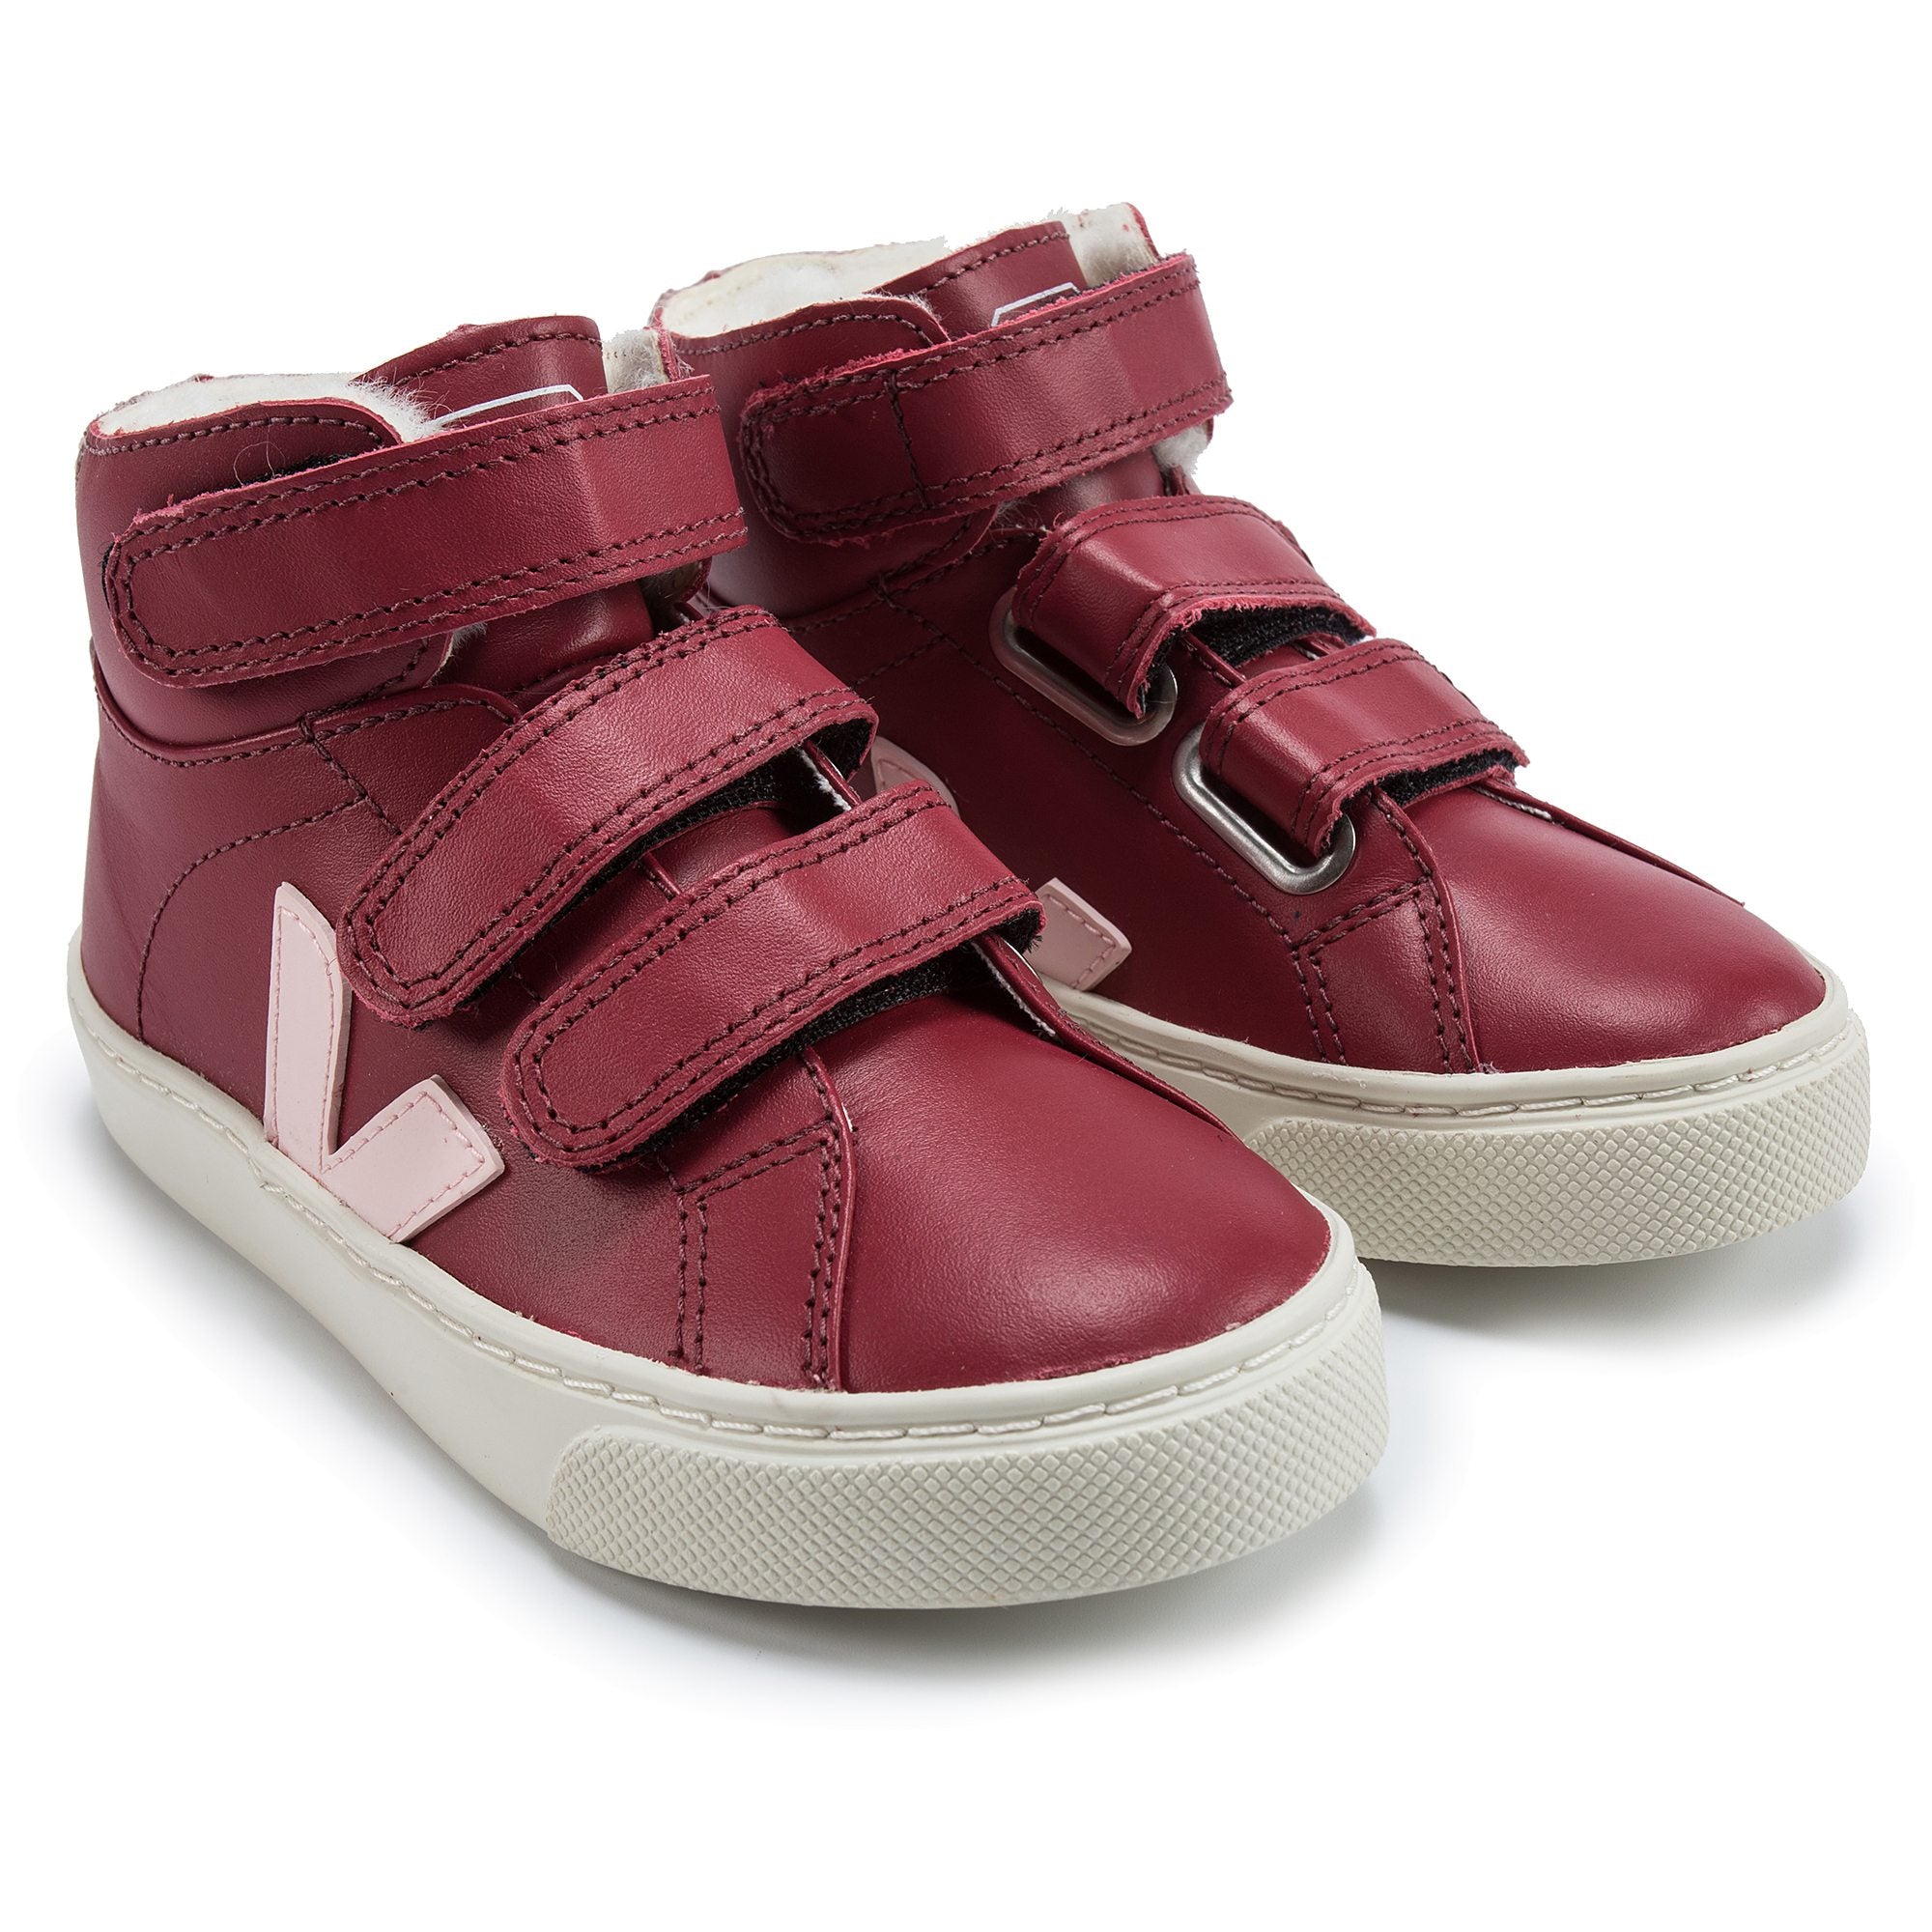 Girls & Boys Red Leather Velcro High Top Shoes